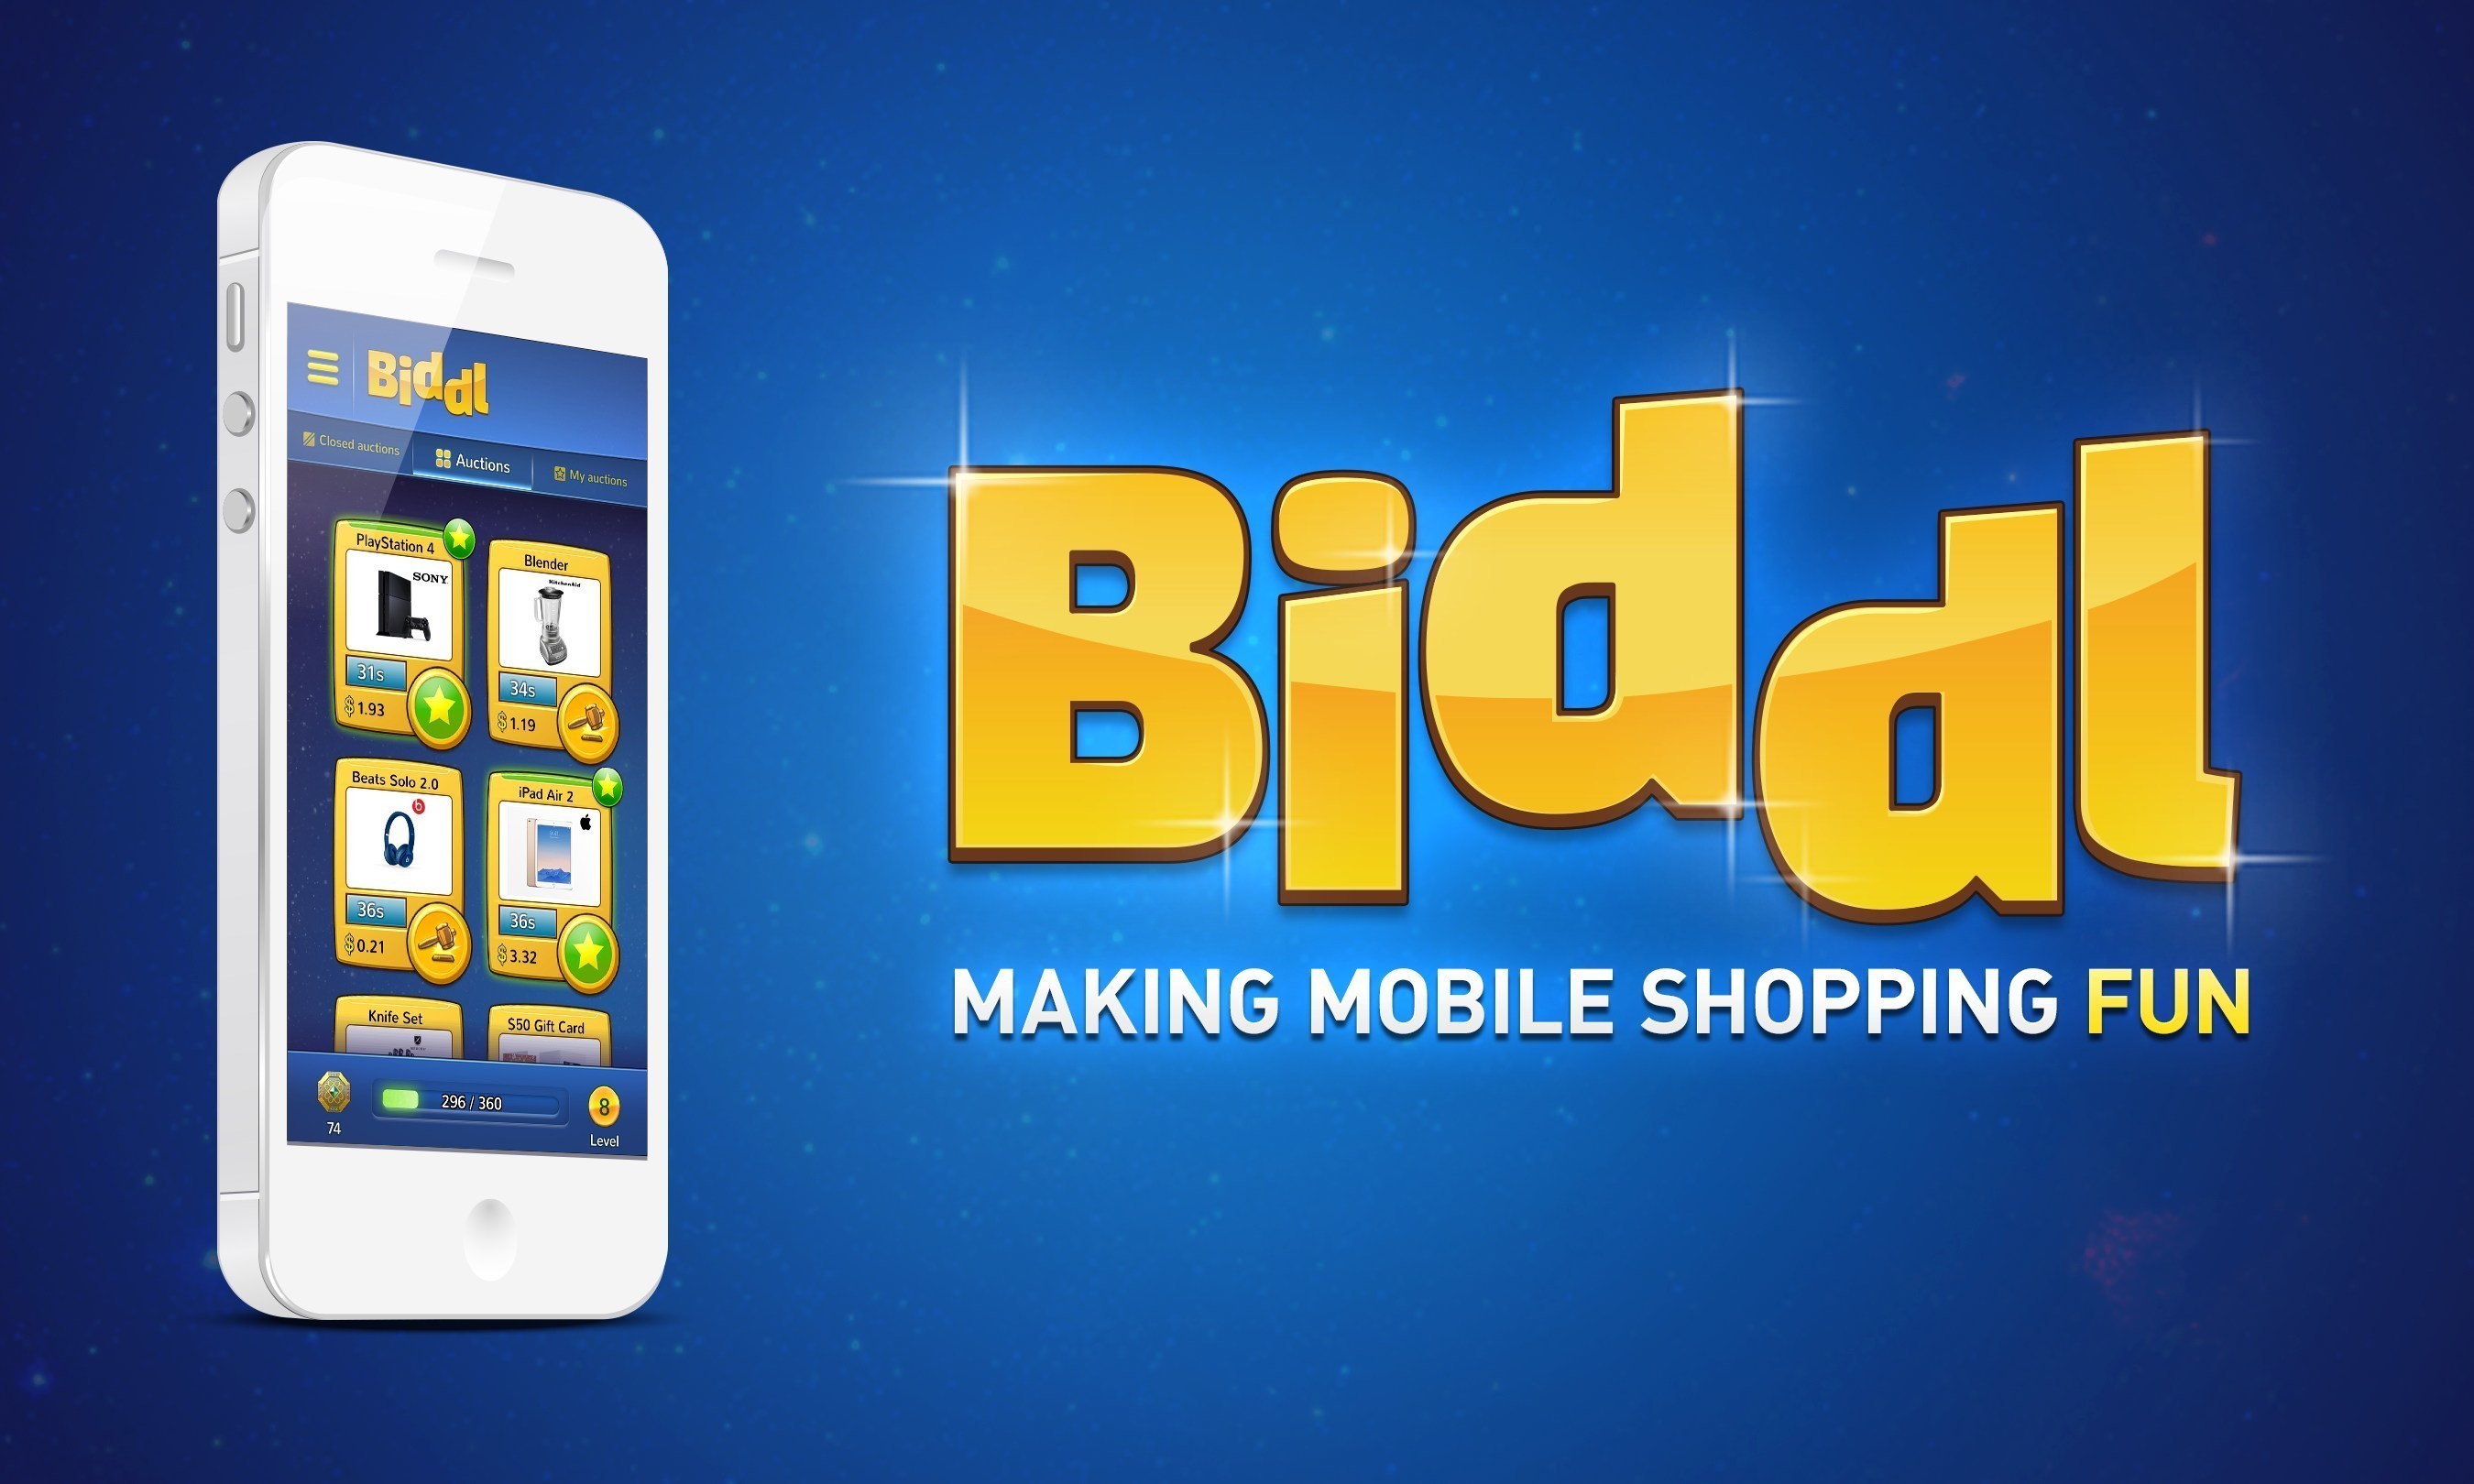 Biddl, the first mobile-only shopping game, aims to make mobile shopping fun by combining mobile game mechanics with easy-to-use shopping features. The result: Biddl allows you to make direct purchases, bid on auctions, hunt for bargains, and play a fun mobile game at the same time wherever you are. Biddl is available for free in the iOS App Store and Google Play Store today.